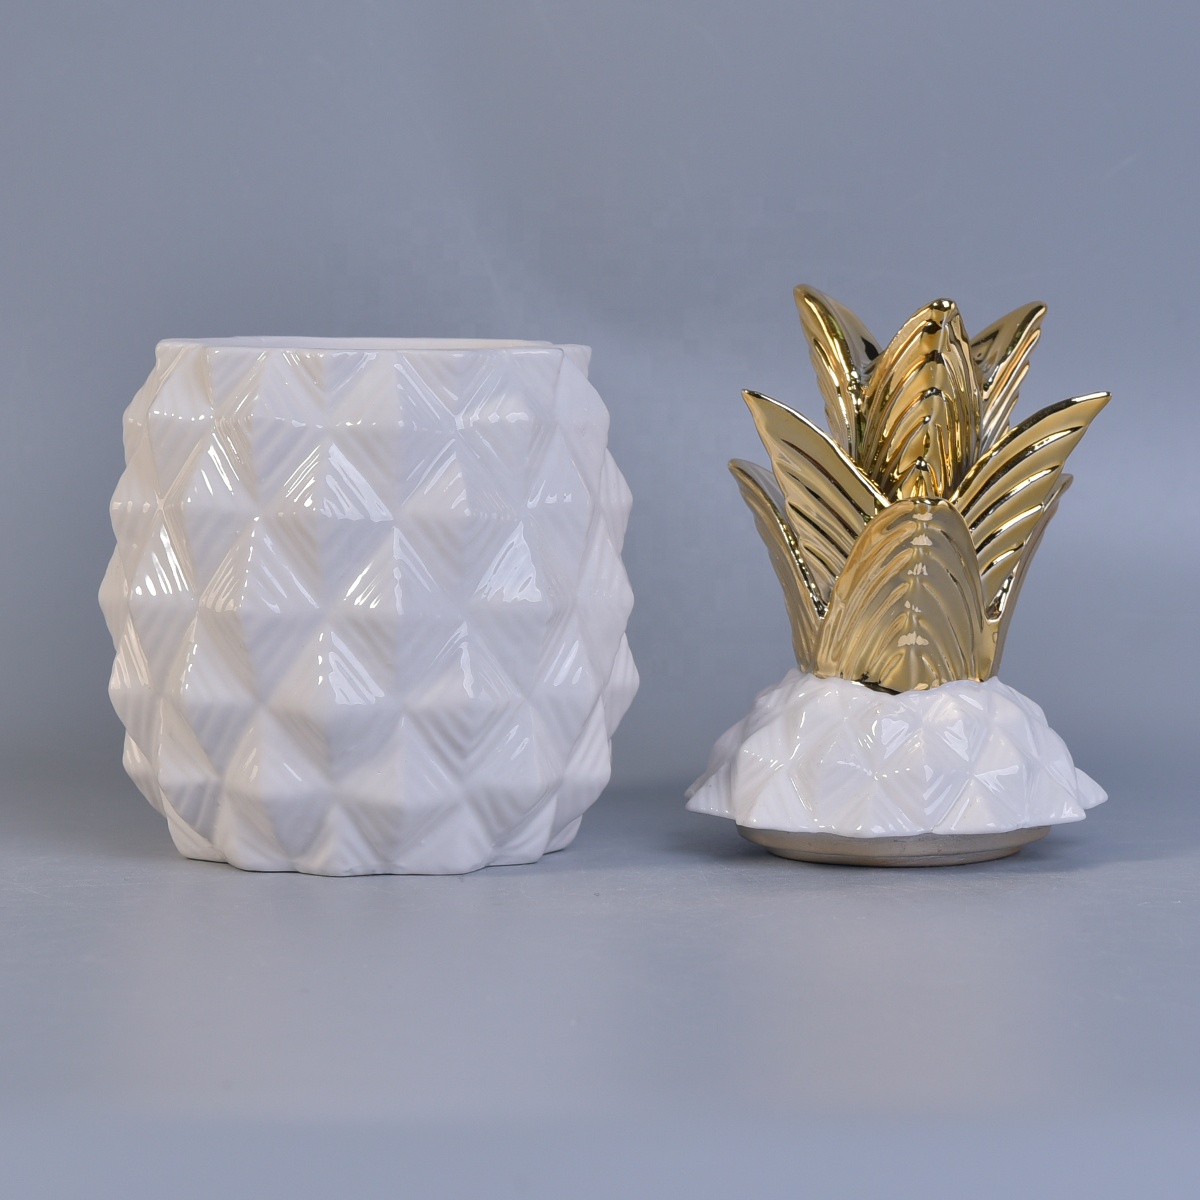 Sunny new design white pineapple ceramic candle vessel with gold lid